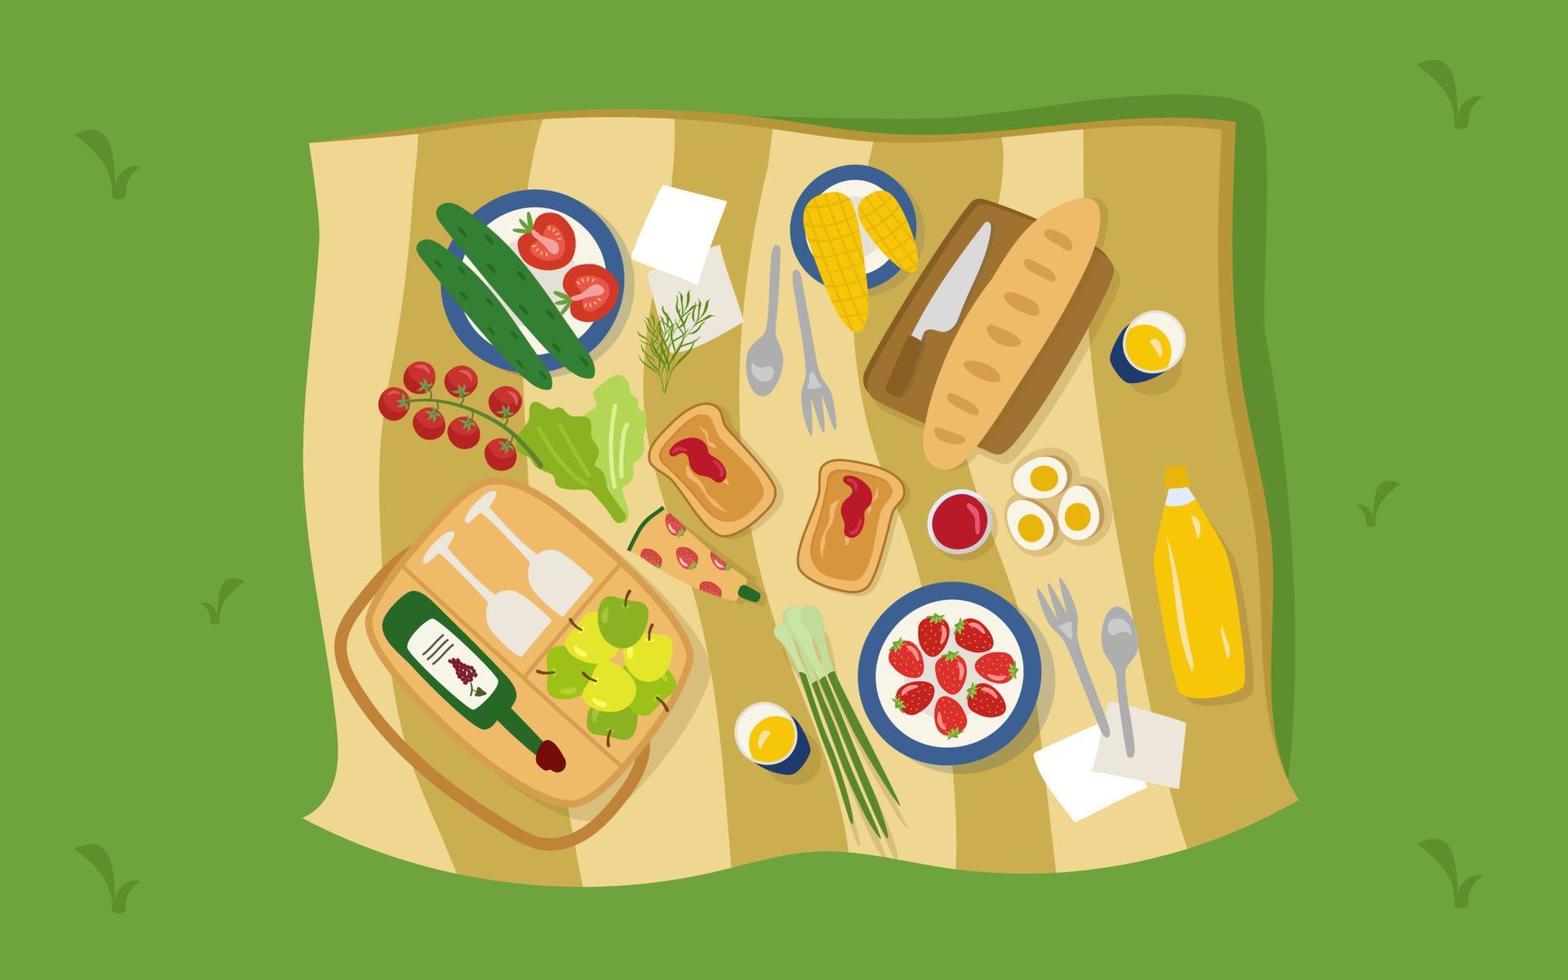 Picnic in nature, top view. A wicker basket with red wine and glasses and delicious raw food on a blanket. Tomatoes, cucumbers, strawberries, jam, apples, greens. Vector appetizing illustration.